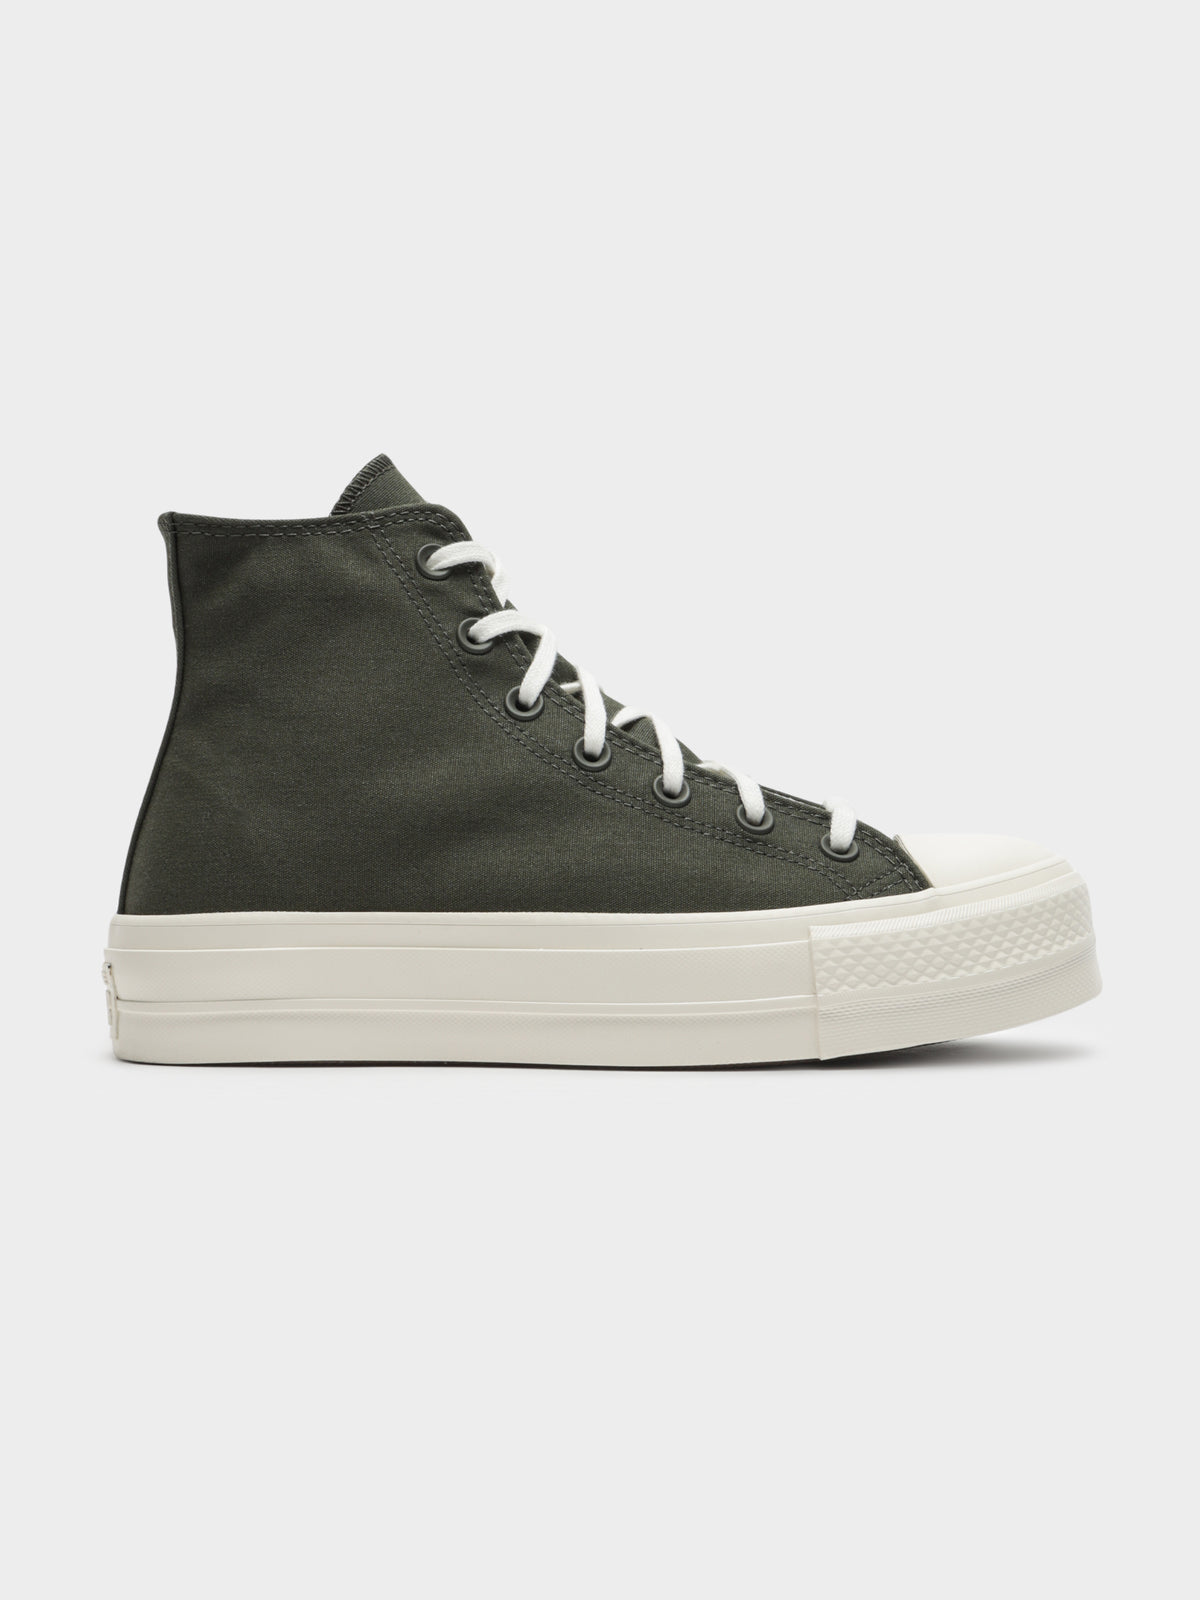 Womens Chuck All Star Recycled Platform Hi Sneakers in Khaki